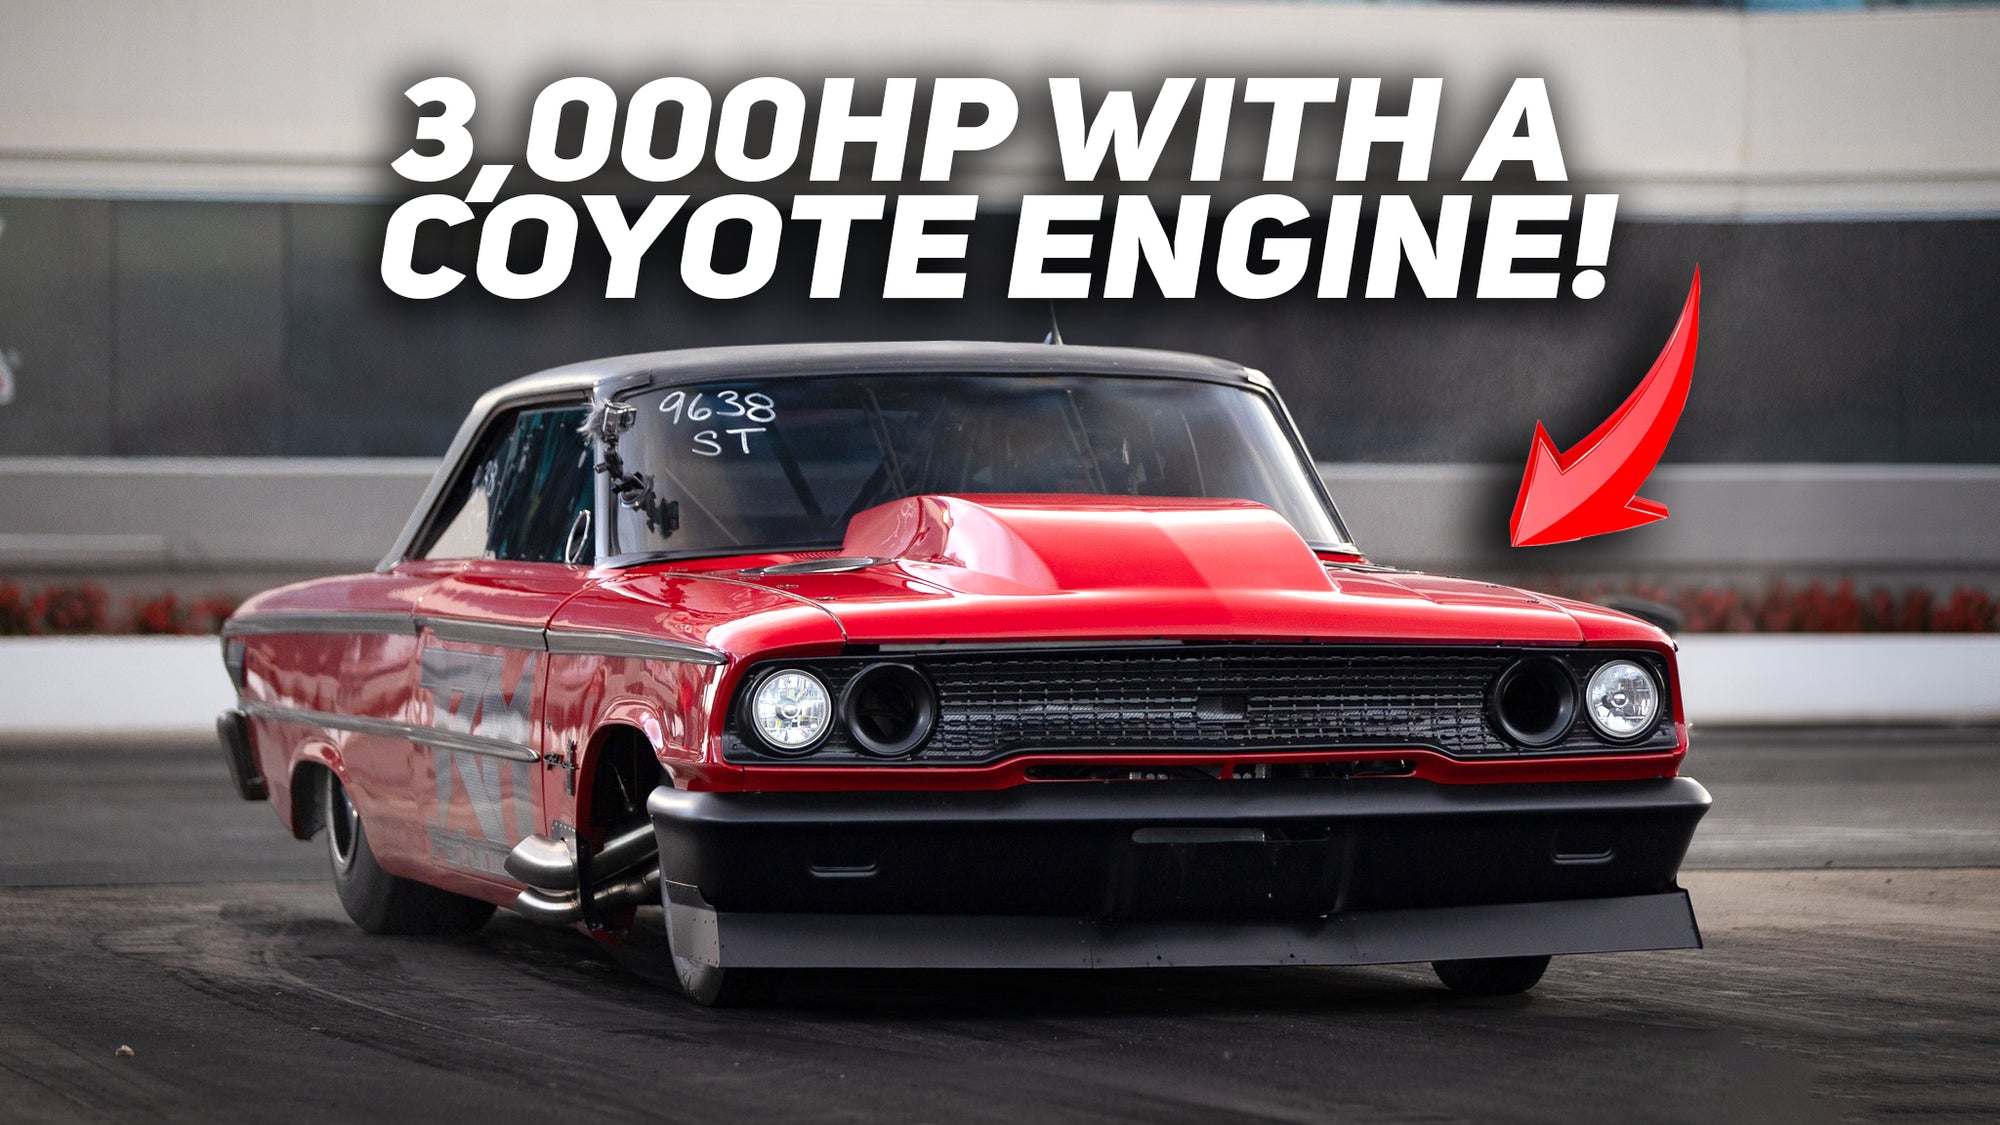 This Ford Galaxie is already FAST AS F*%& on it's First Passes (2800HP Coyote Powered)